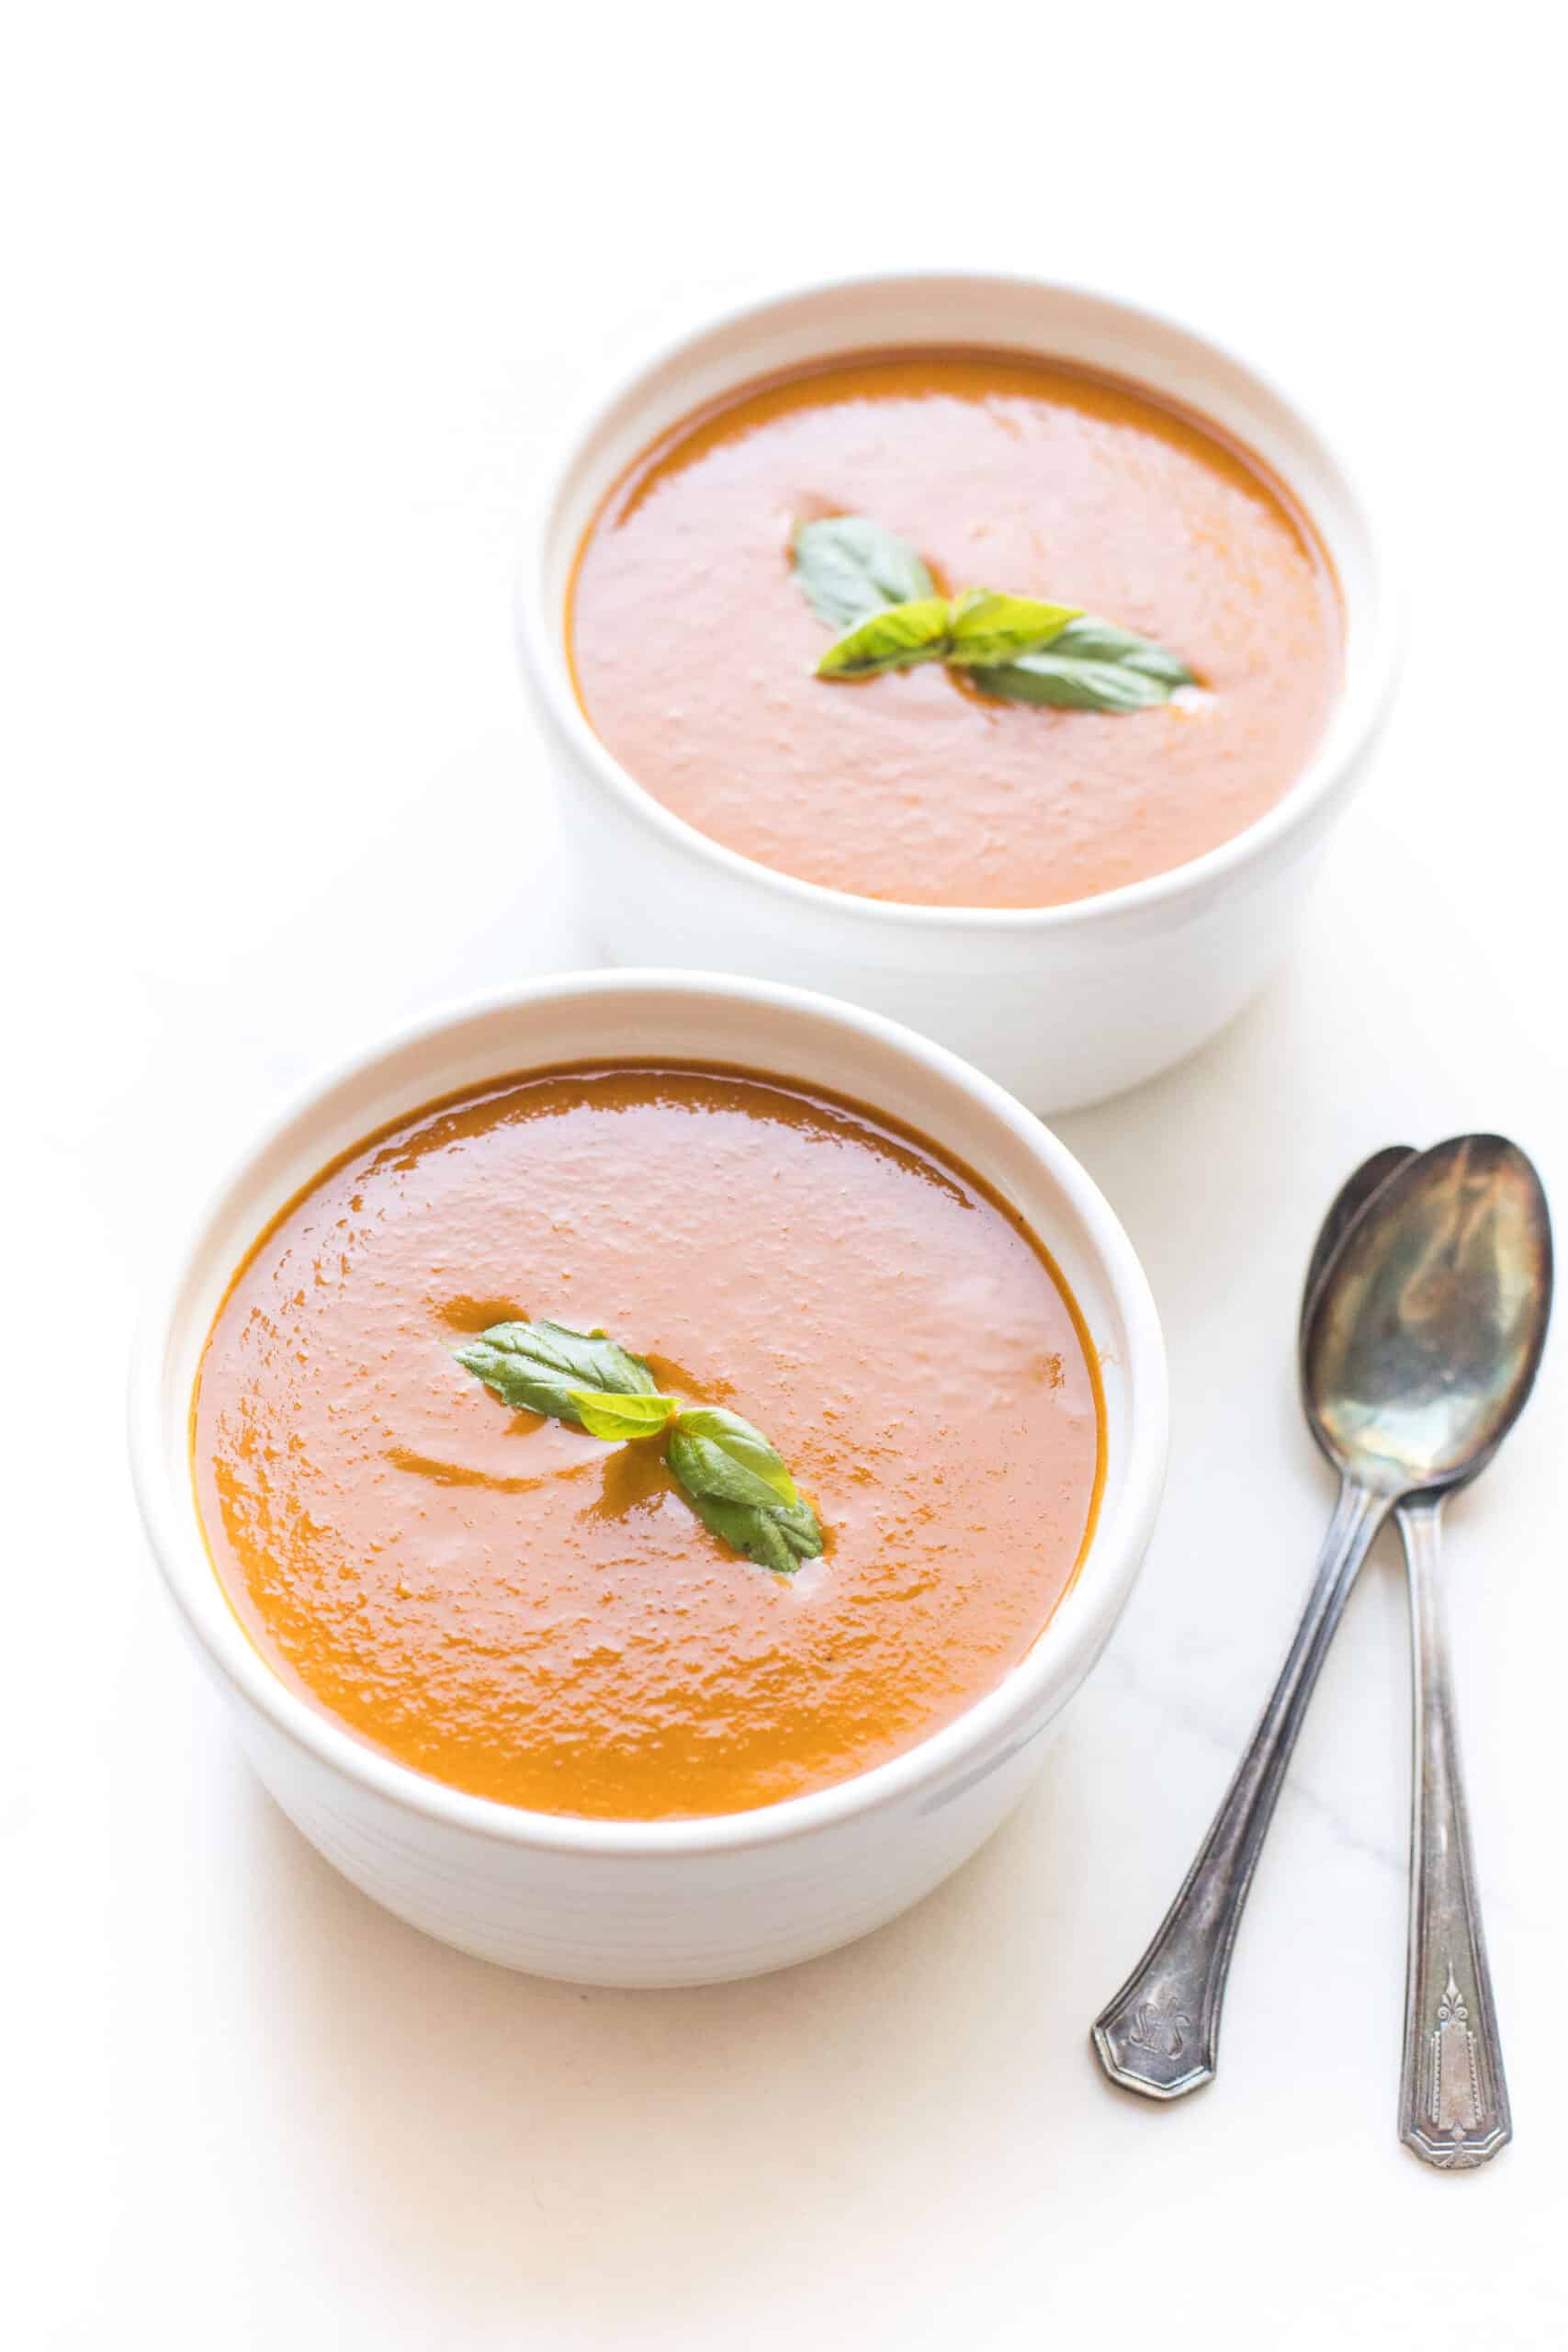 roasted tomato basil soup in a white bowl on a white background